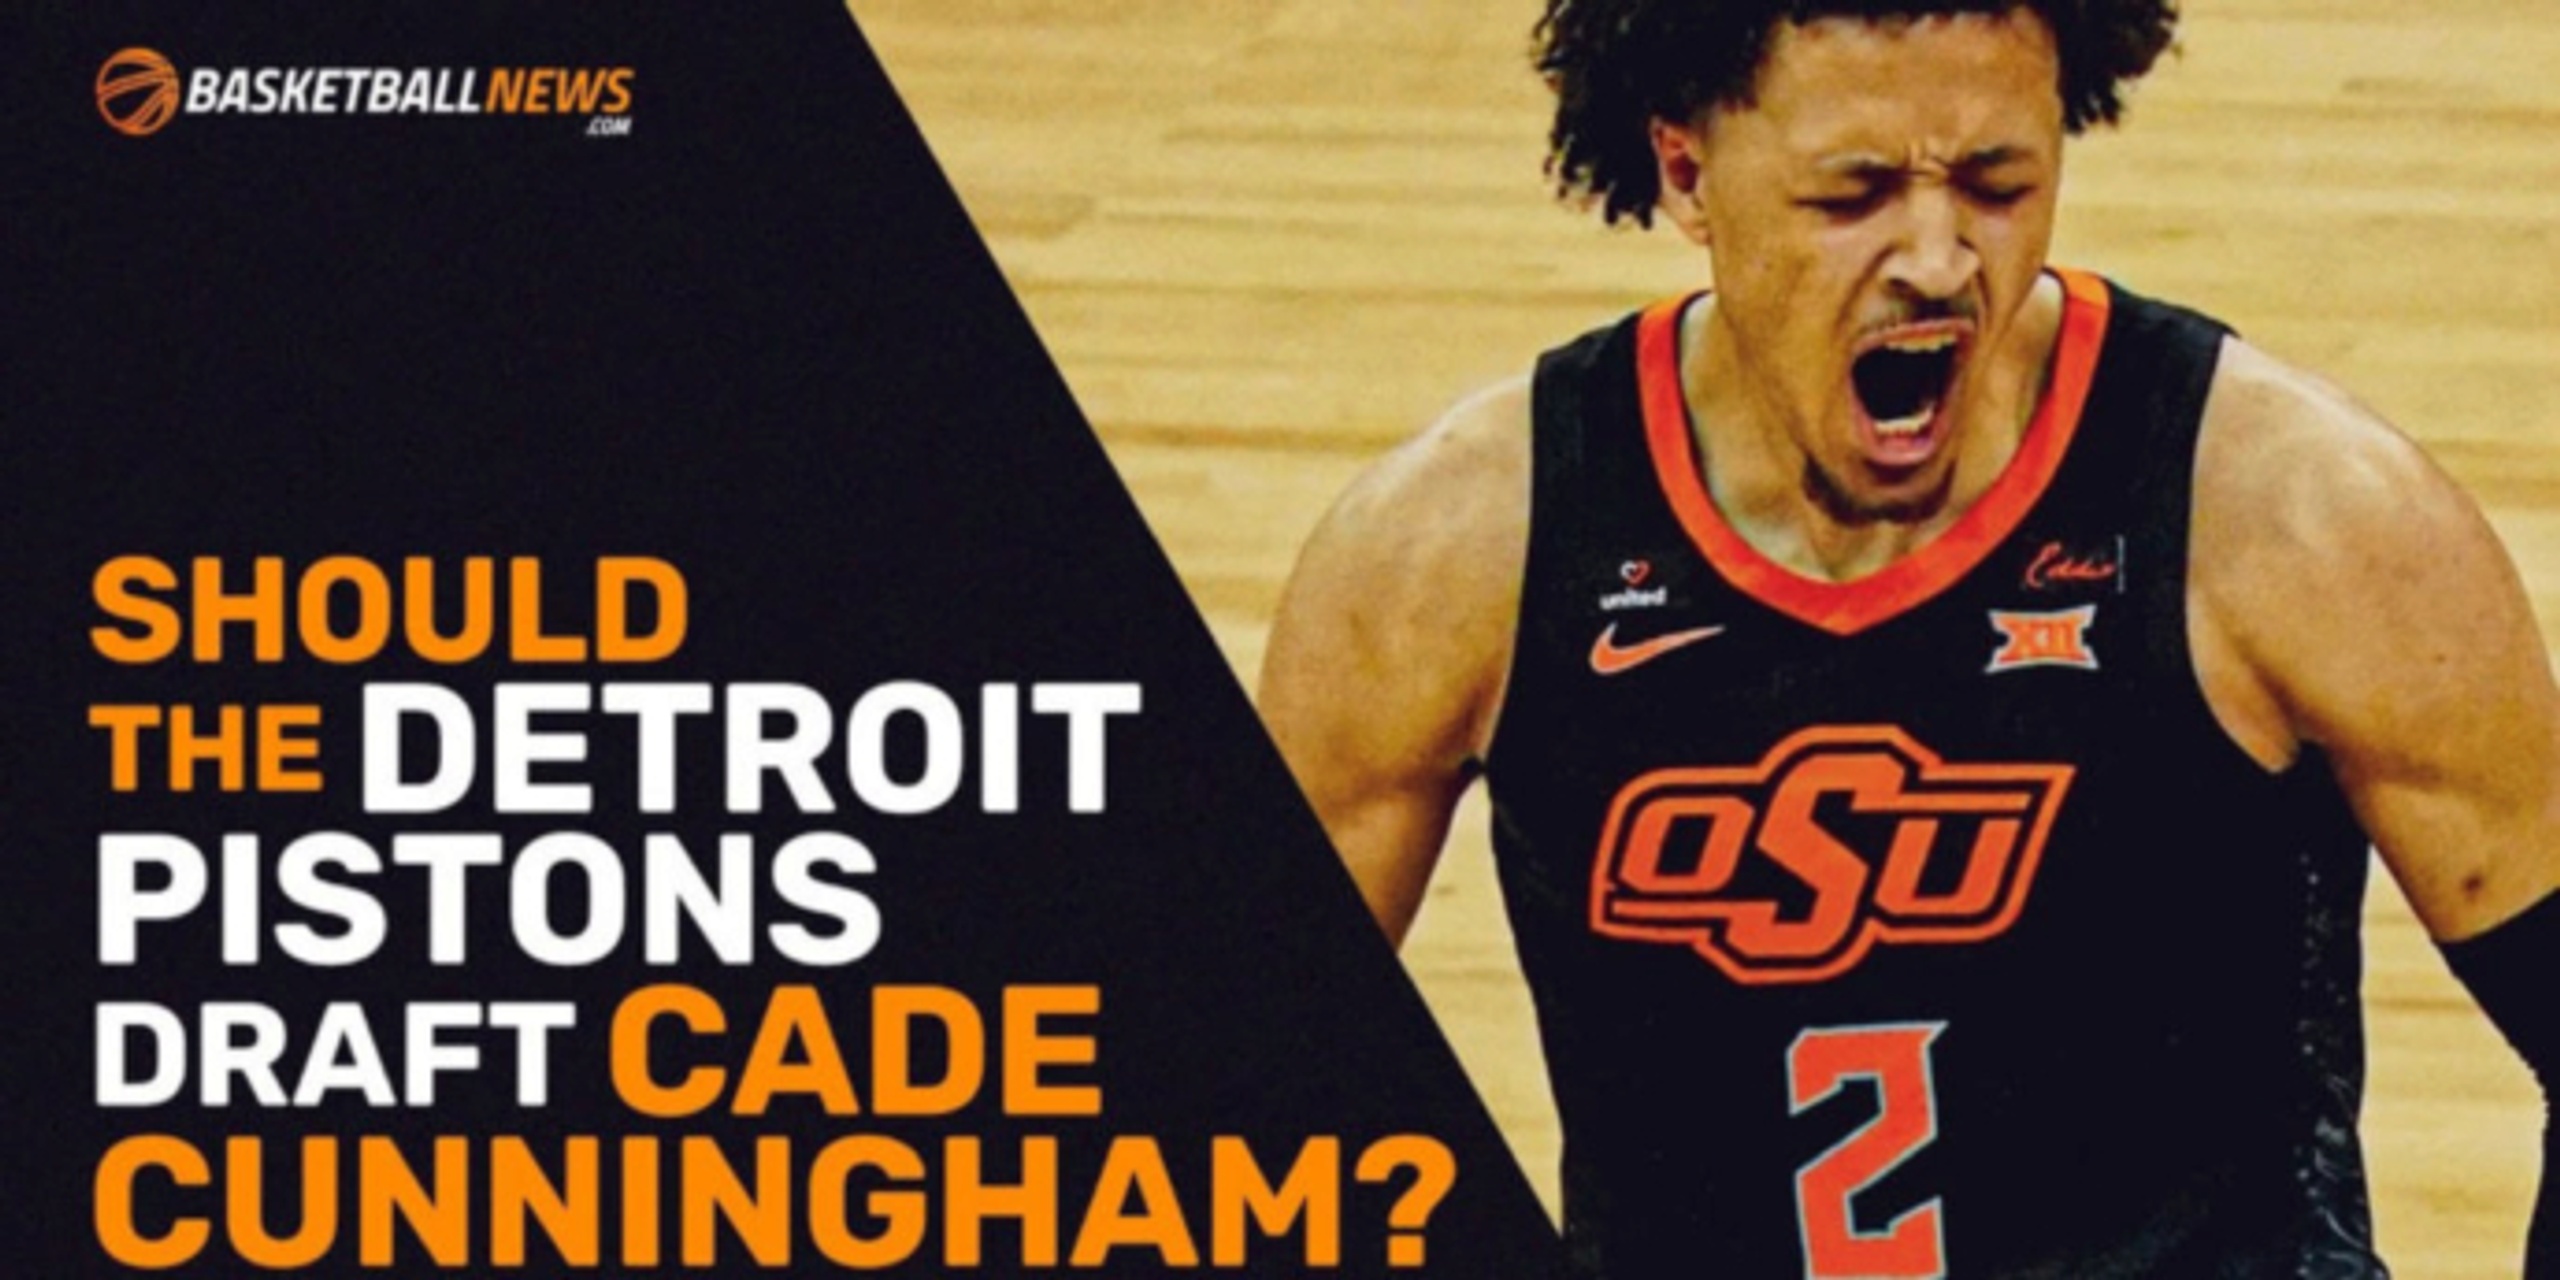 Should the Pistons draft Cade Cunningham with the No. 1 pick?